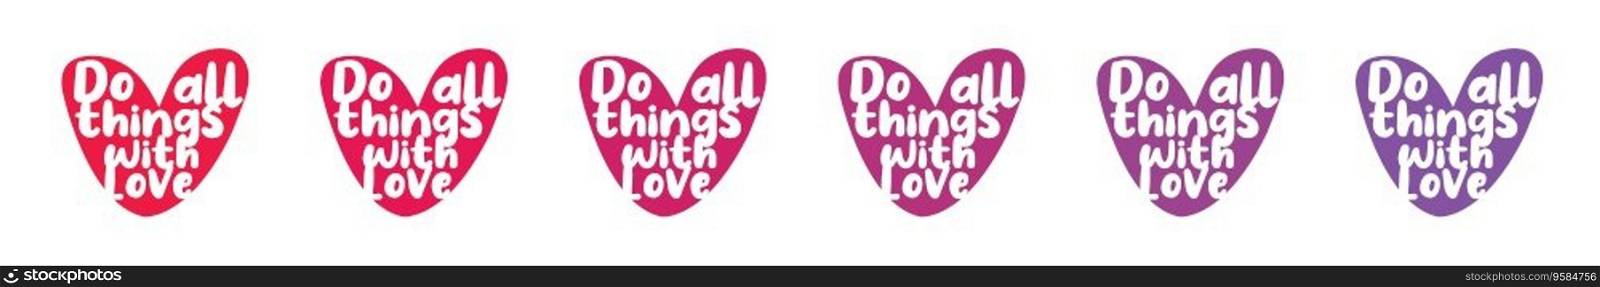 Do all things with love - made with love, sticker, red, purple, lilac, tag, stamp, set of labels